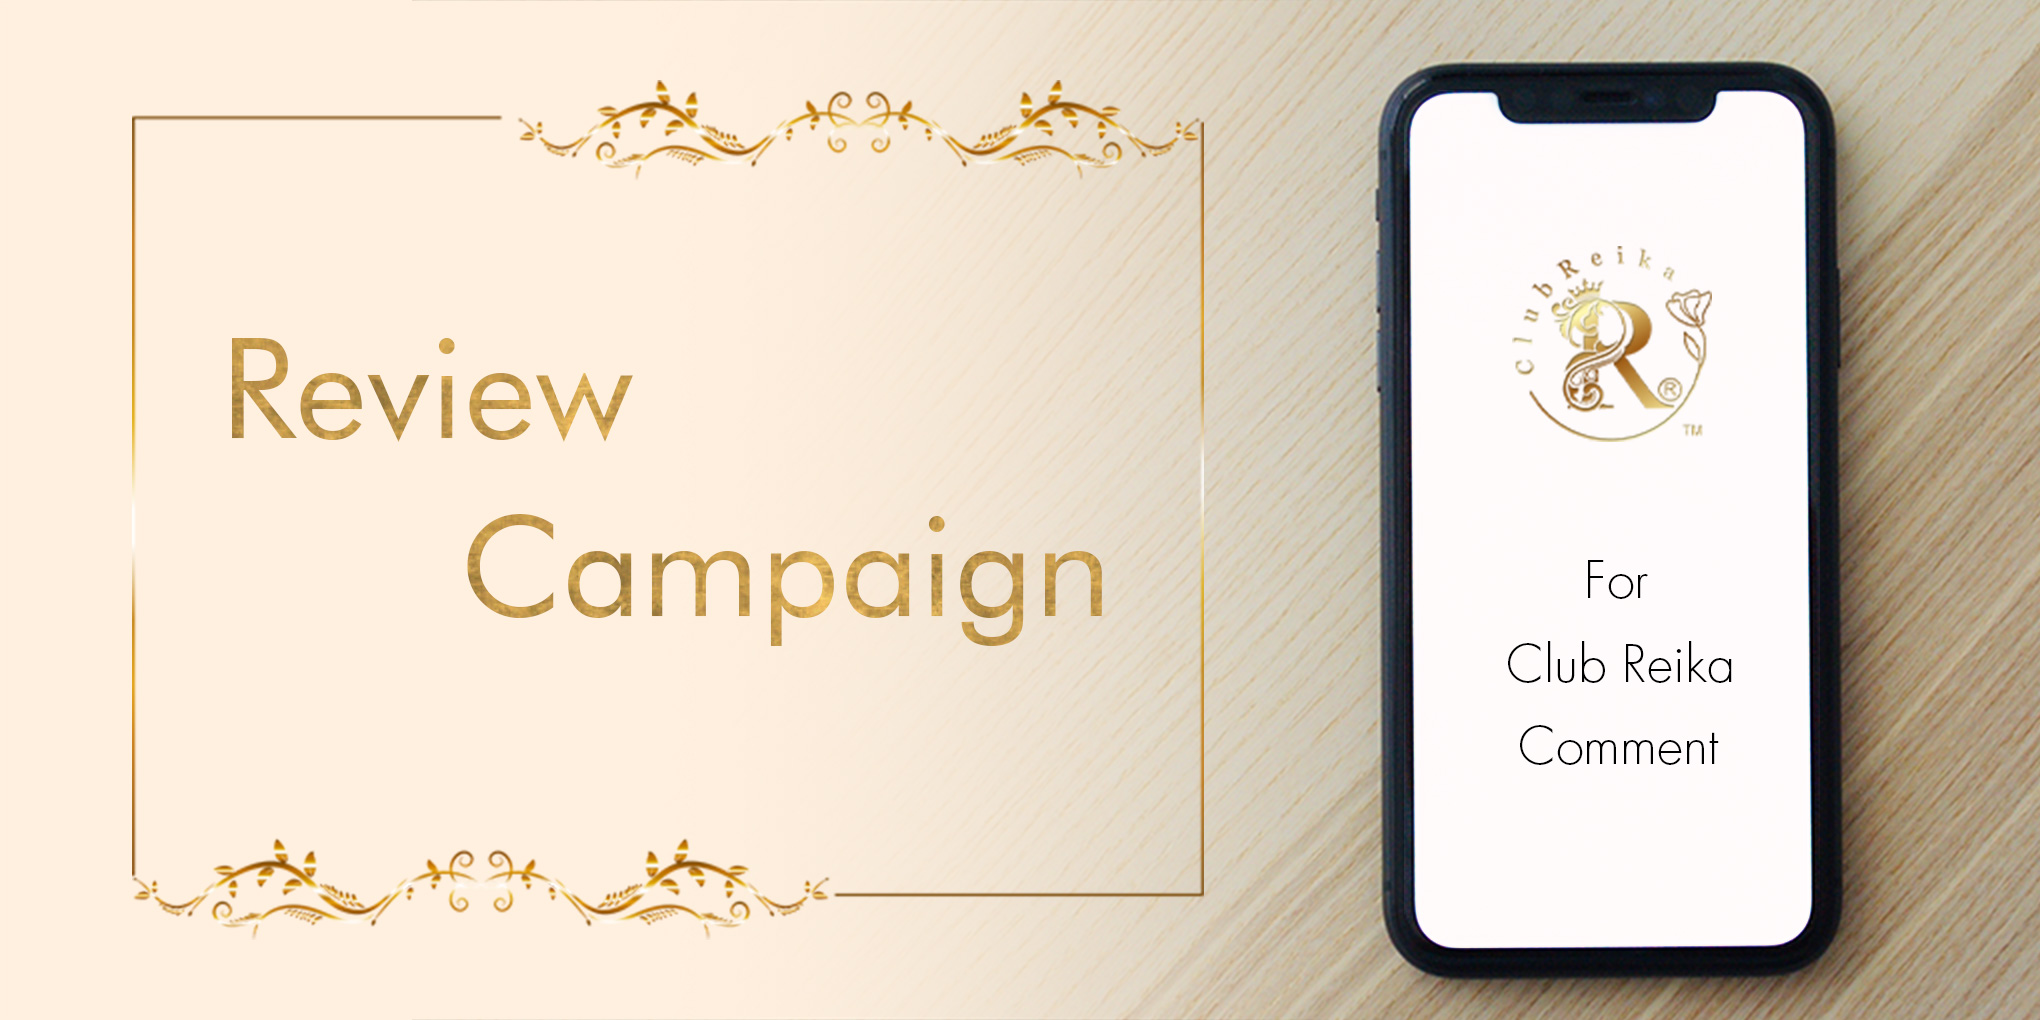 Review Campaign